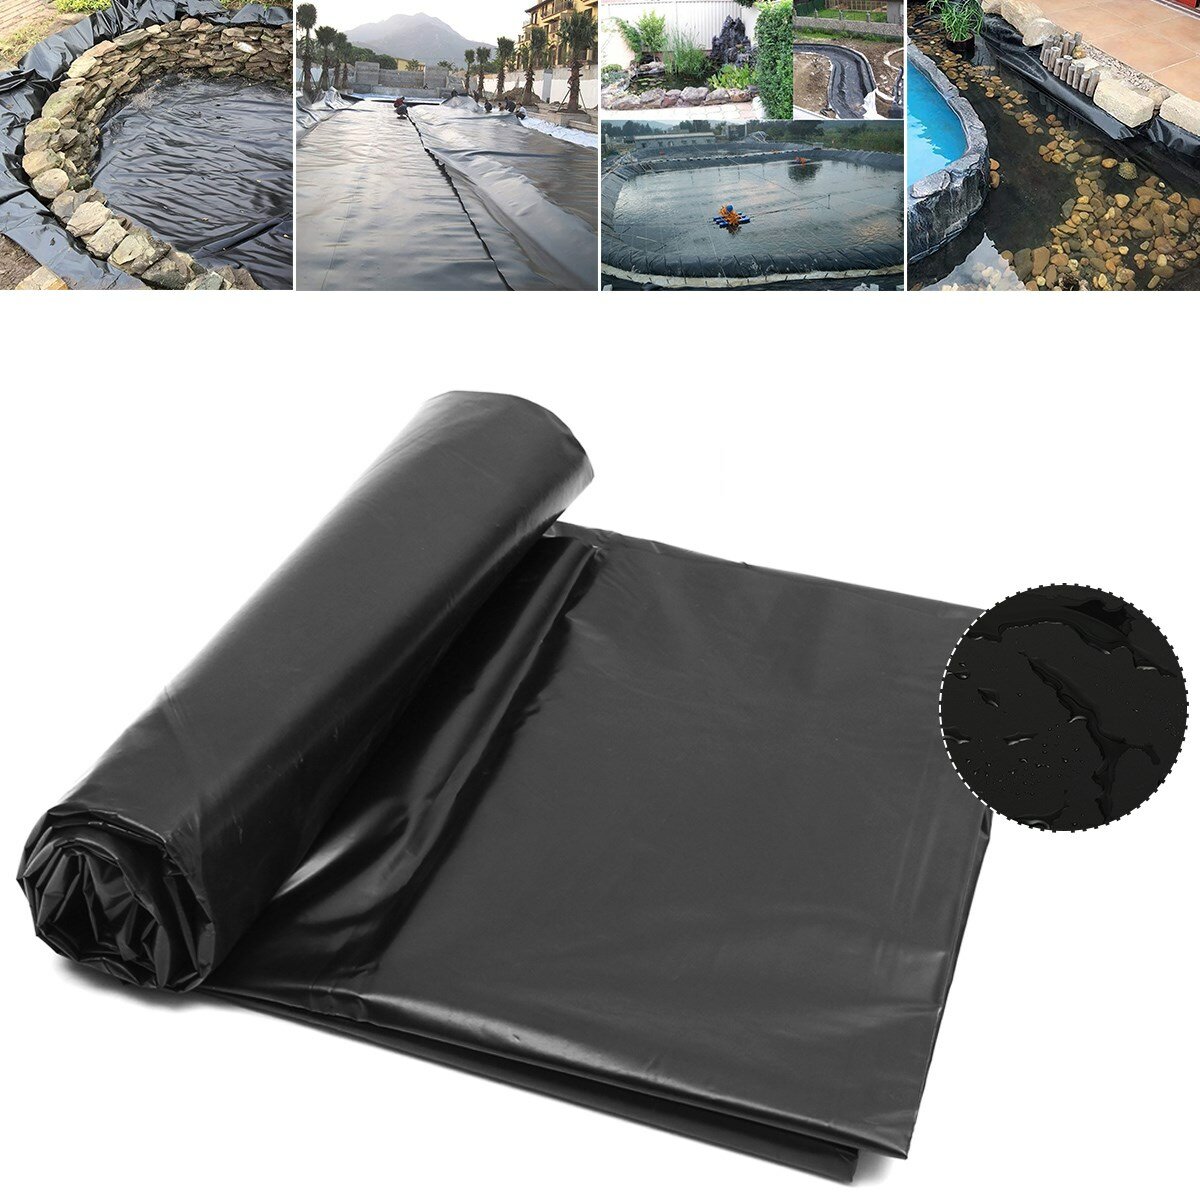 

UV Resistant Pond Liner, Durable and Long-Lasting, Tear Resistant & Heavy Duty Remnants Stream Garden Landscaping